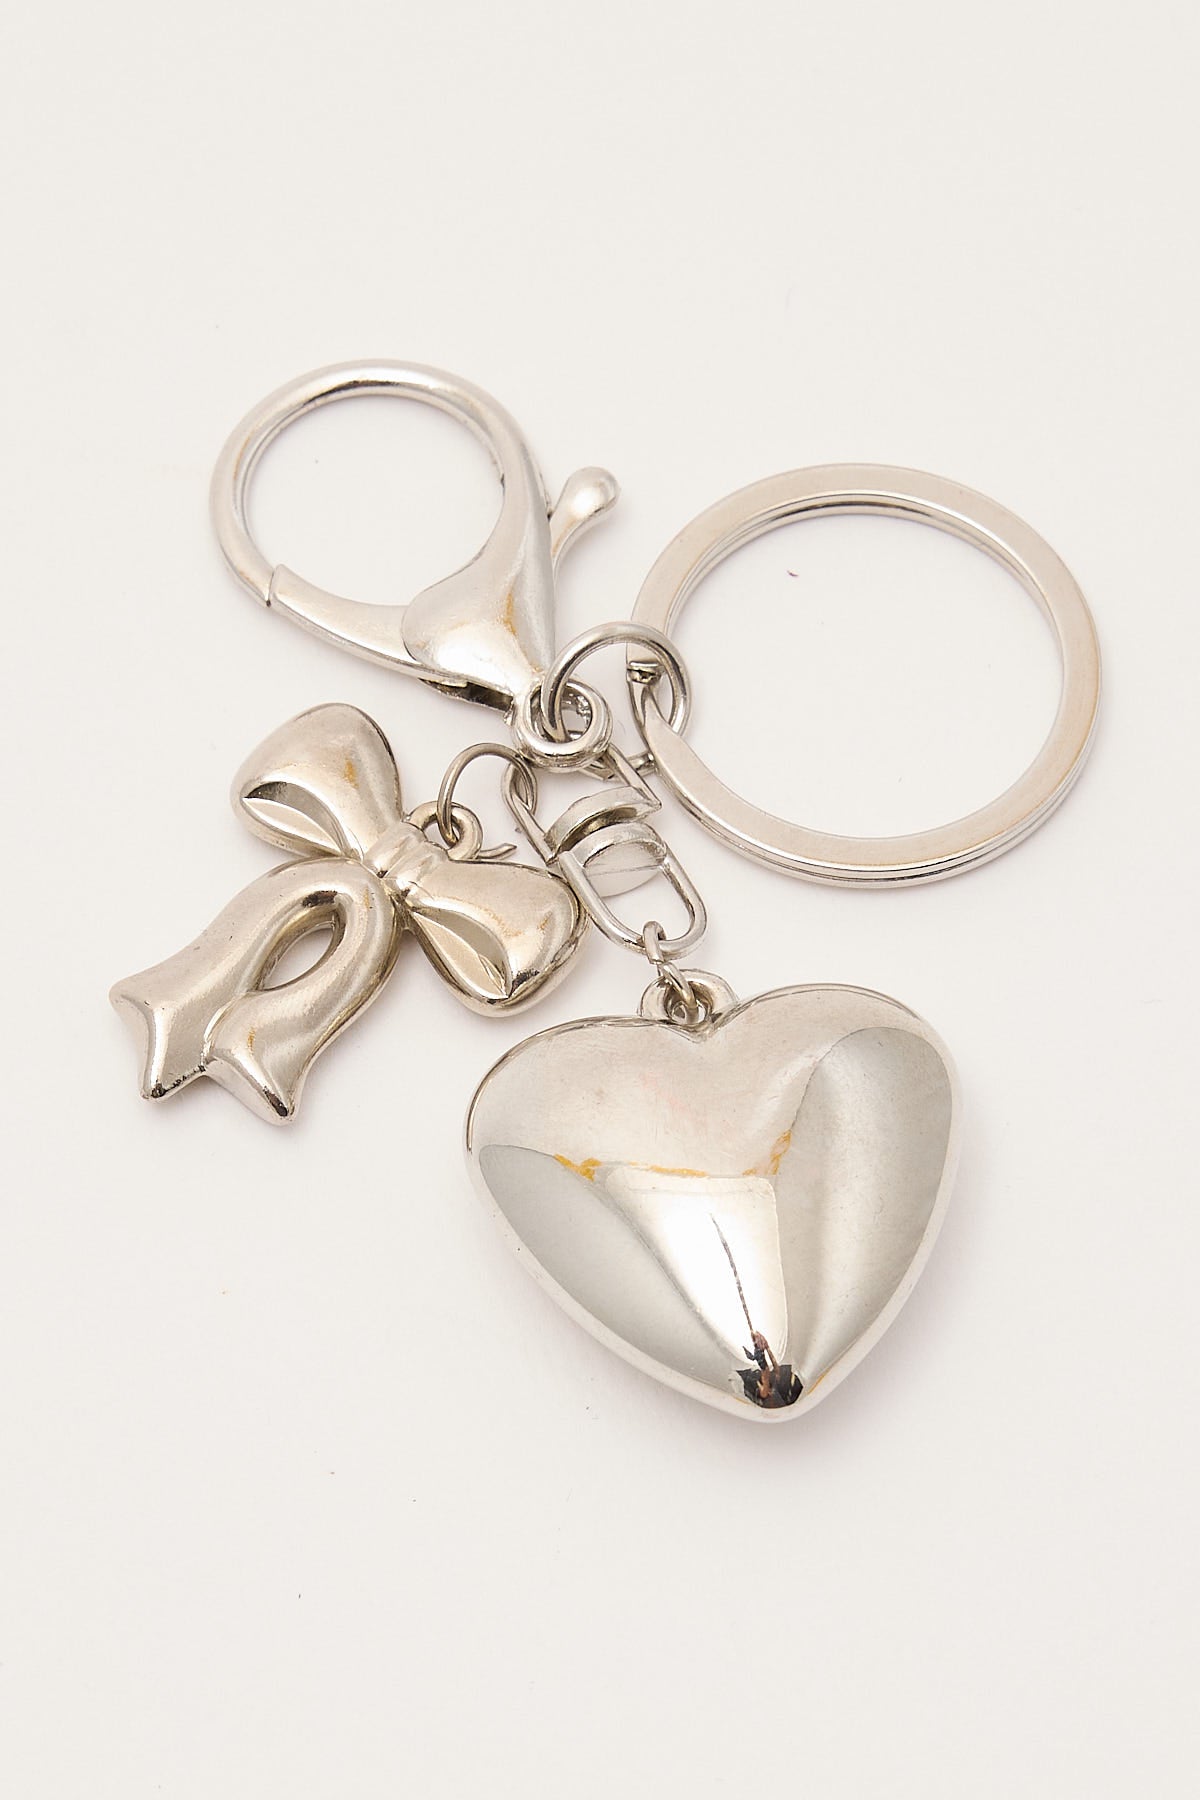 Token Ribbon and Heart Bag Keychain Silver